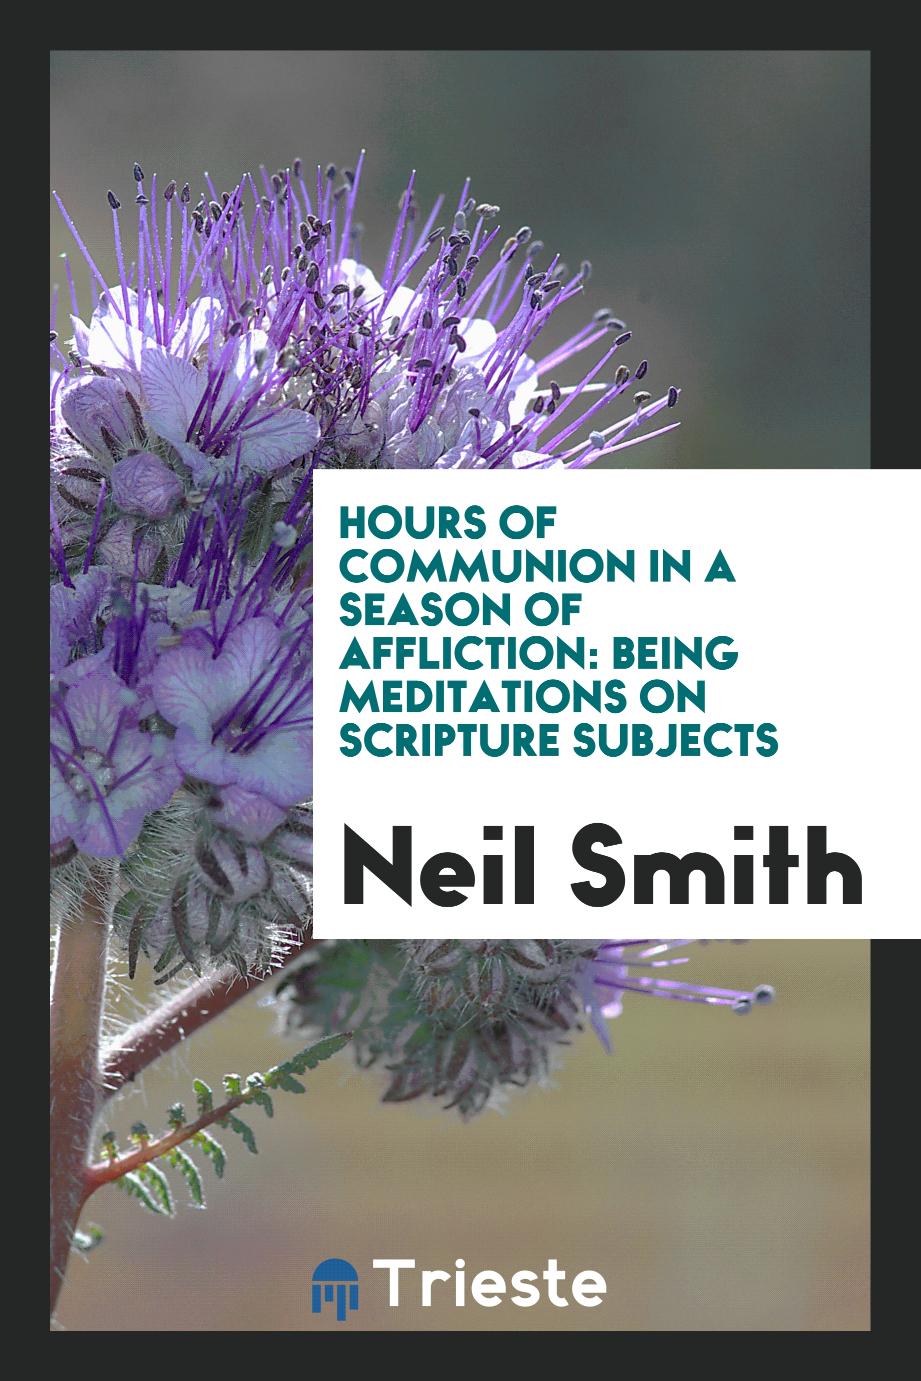 Hours of Communion in a Season of Affliction: Being Meditations on Scripture Subjects